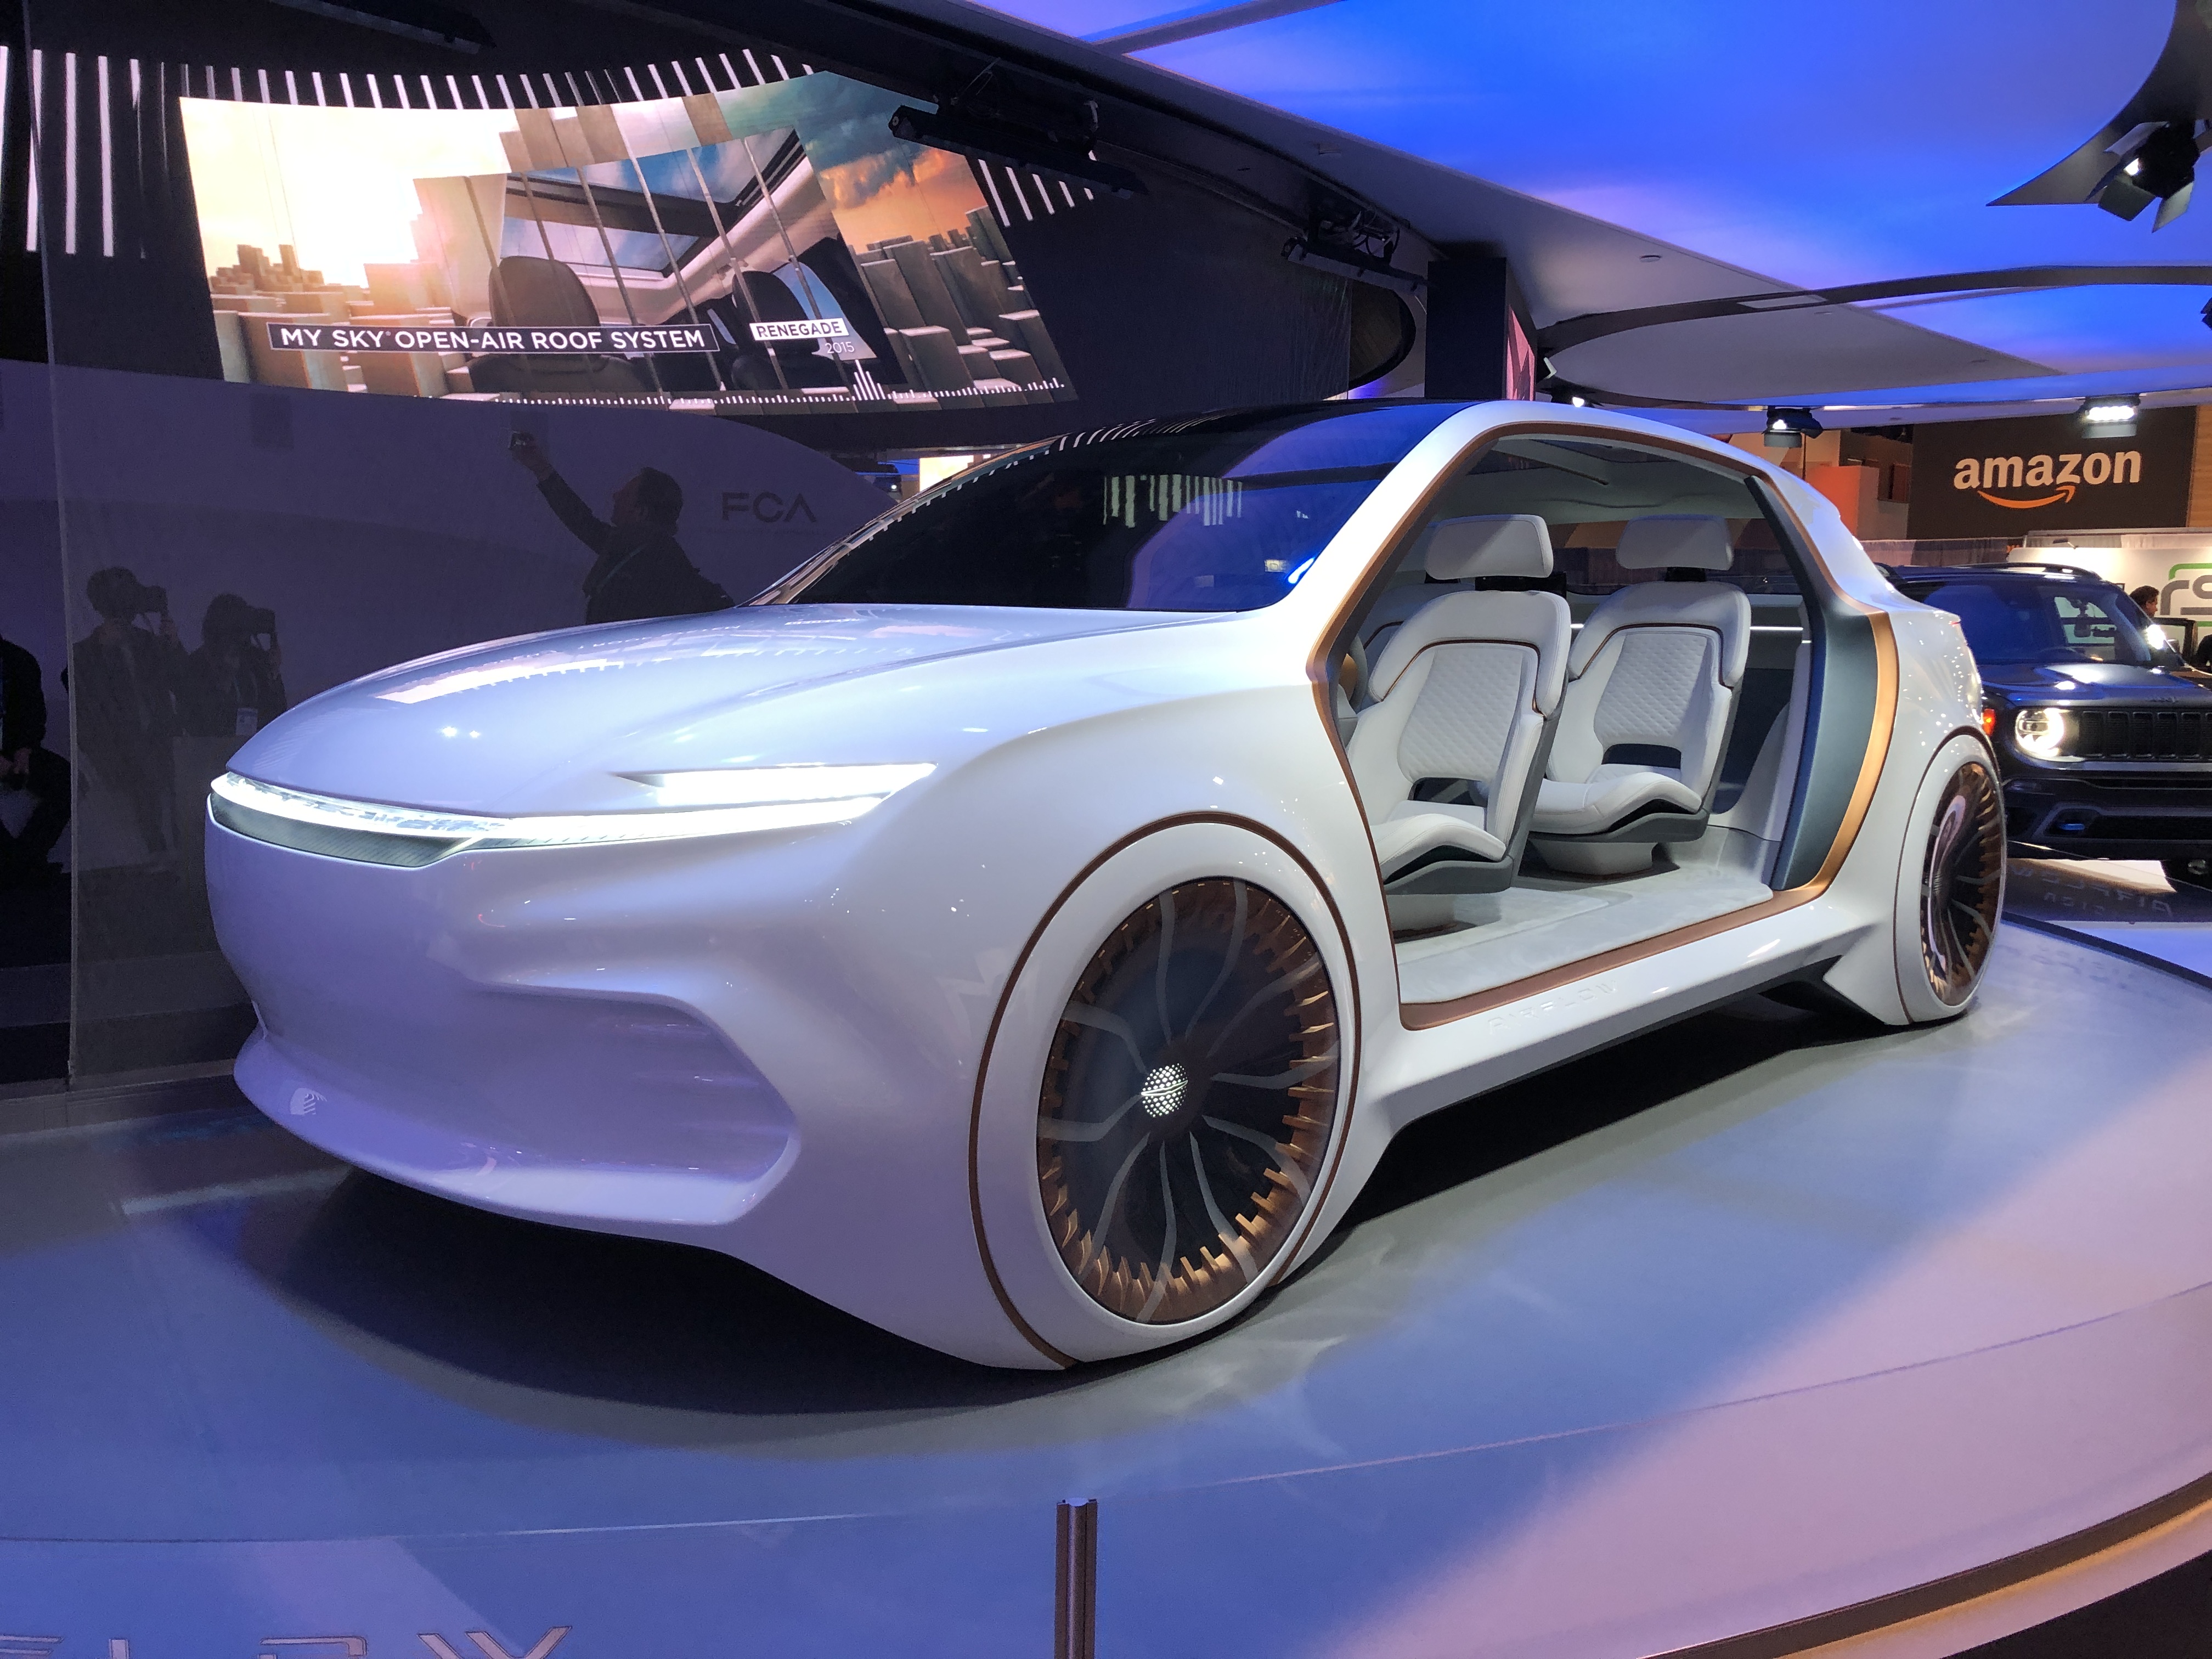 The Best Concept Cars of CES 2020: Sony Vision S, Mercedes AVTR